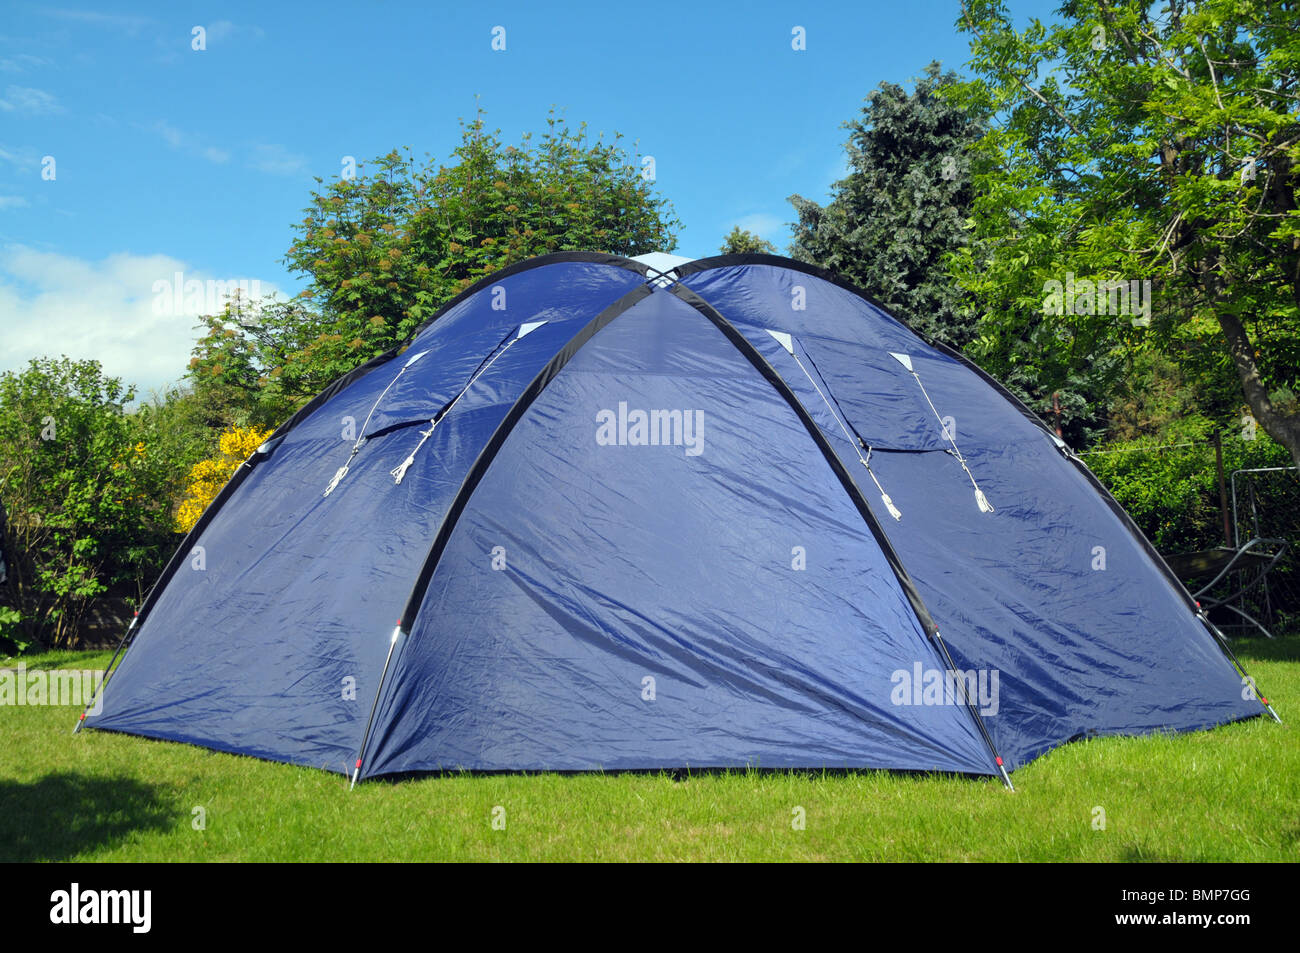 A blue tent in a back garden lawn. Stock Photo